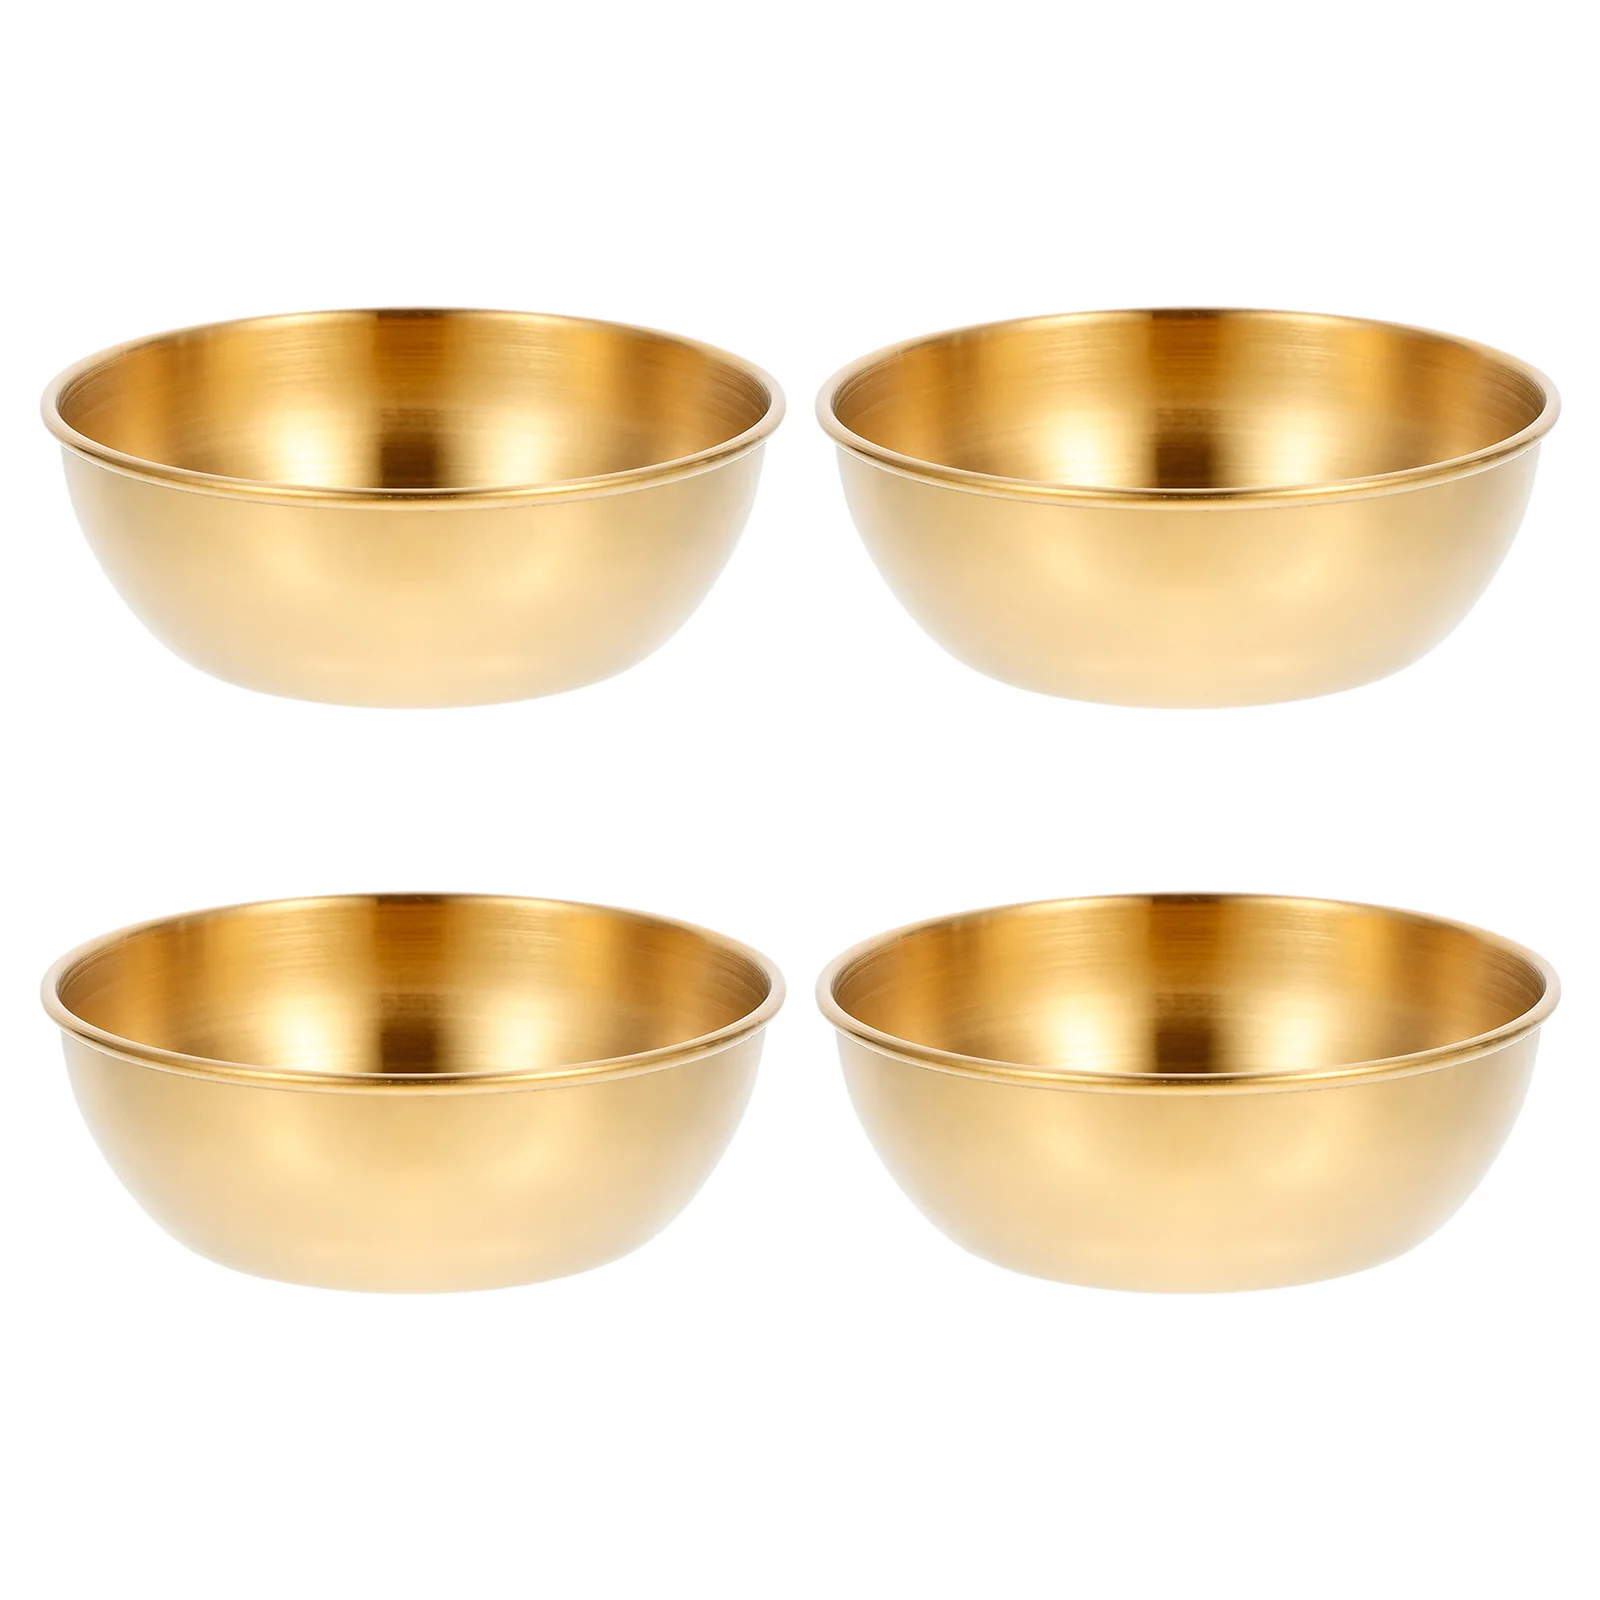 

Sauce Dish Bowls Dipping Bowl Dishes Cups Steel Stainless Seasoningappetizer Soy Mini Plateplates Condiment Serving Metal Sushi